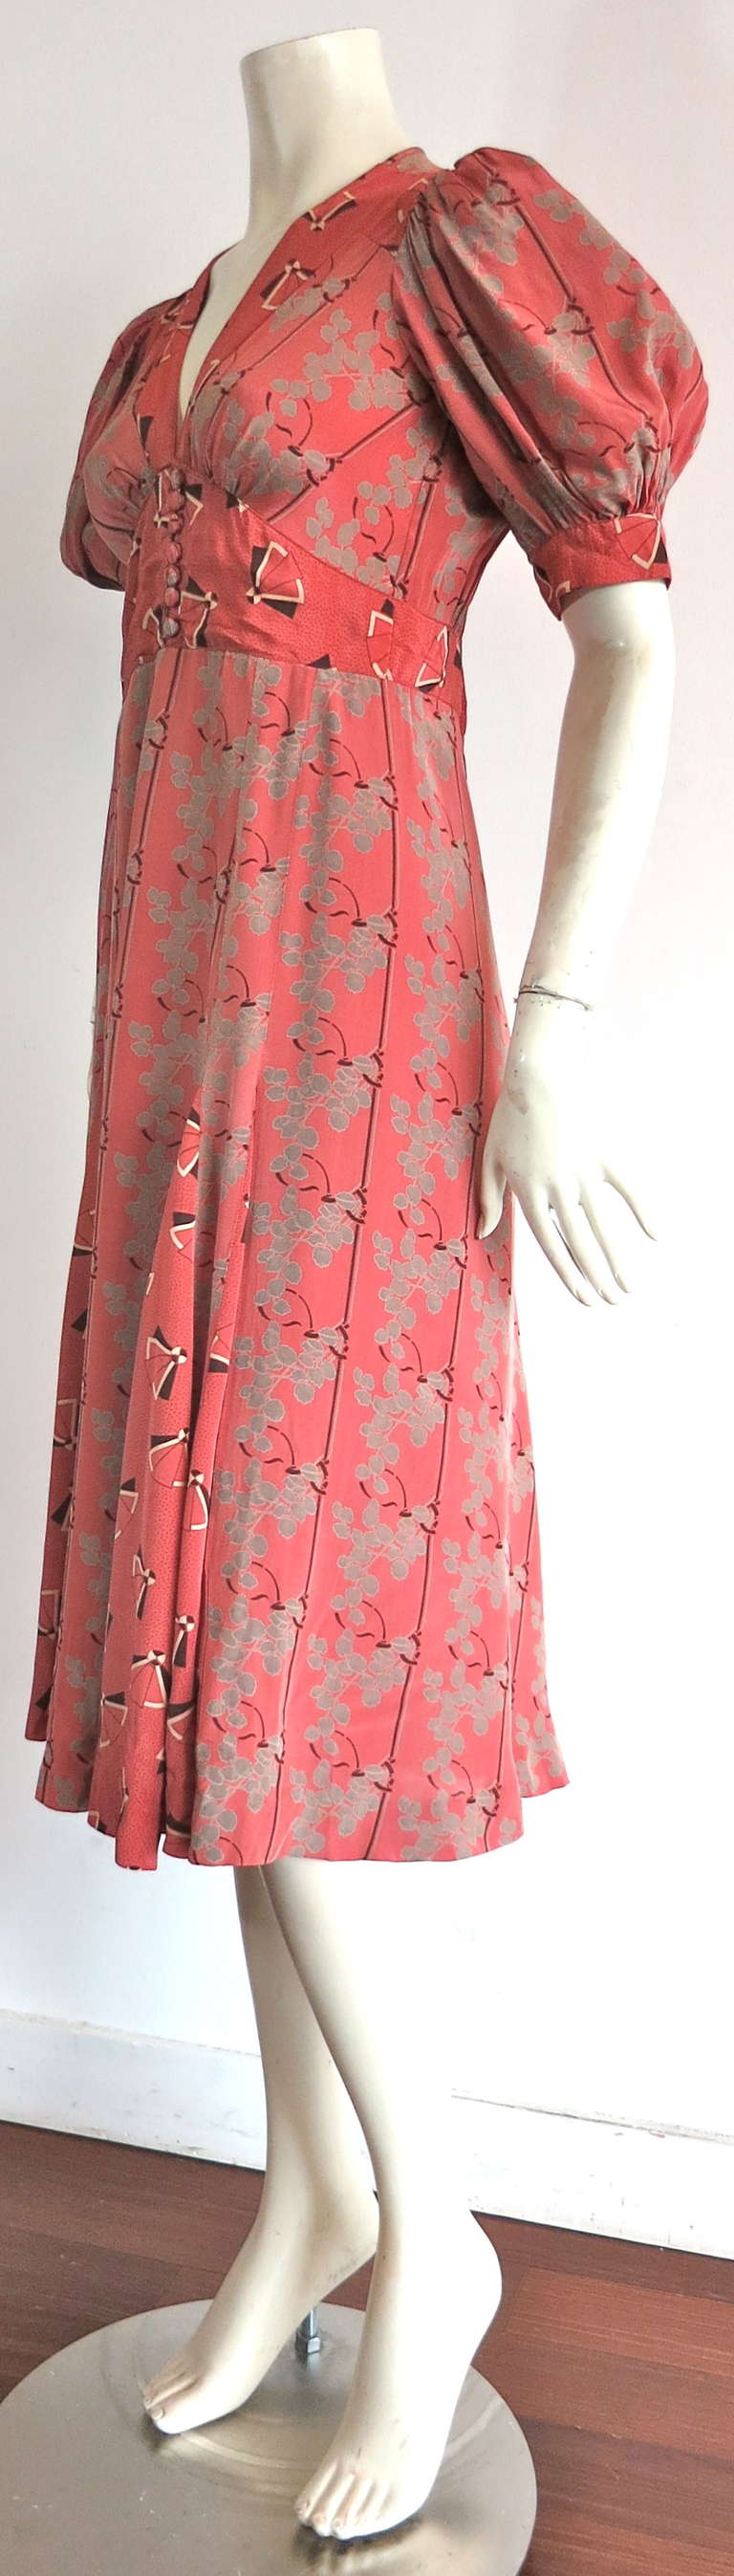 1970's JEFF BANKS Dual print godet dress In Good Condition For Sale In Newport Beach, CA